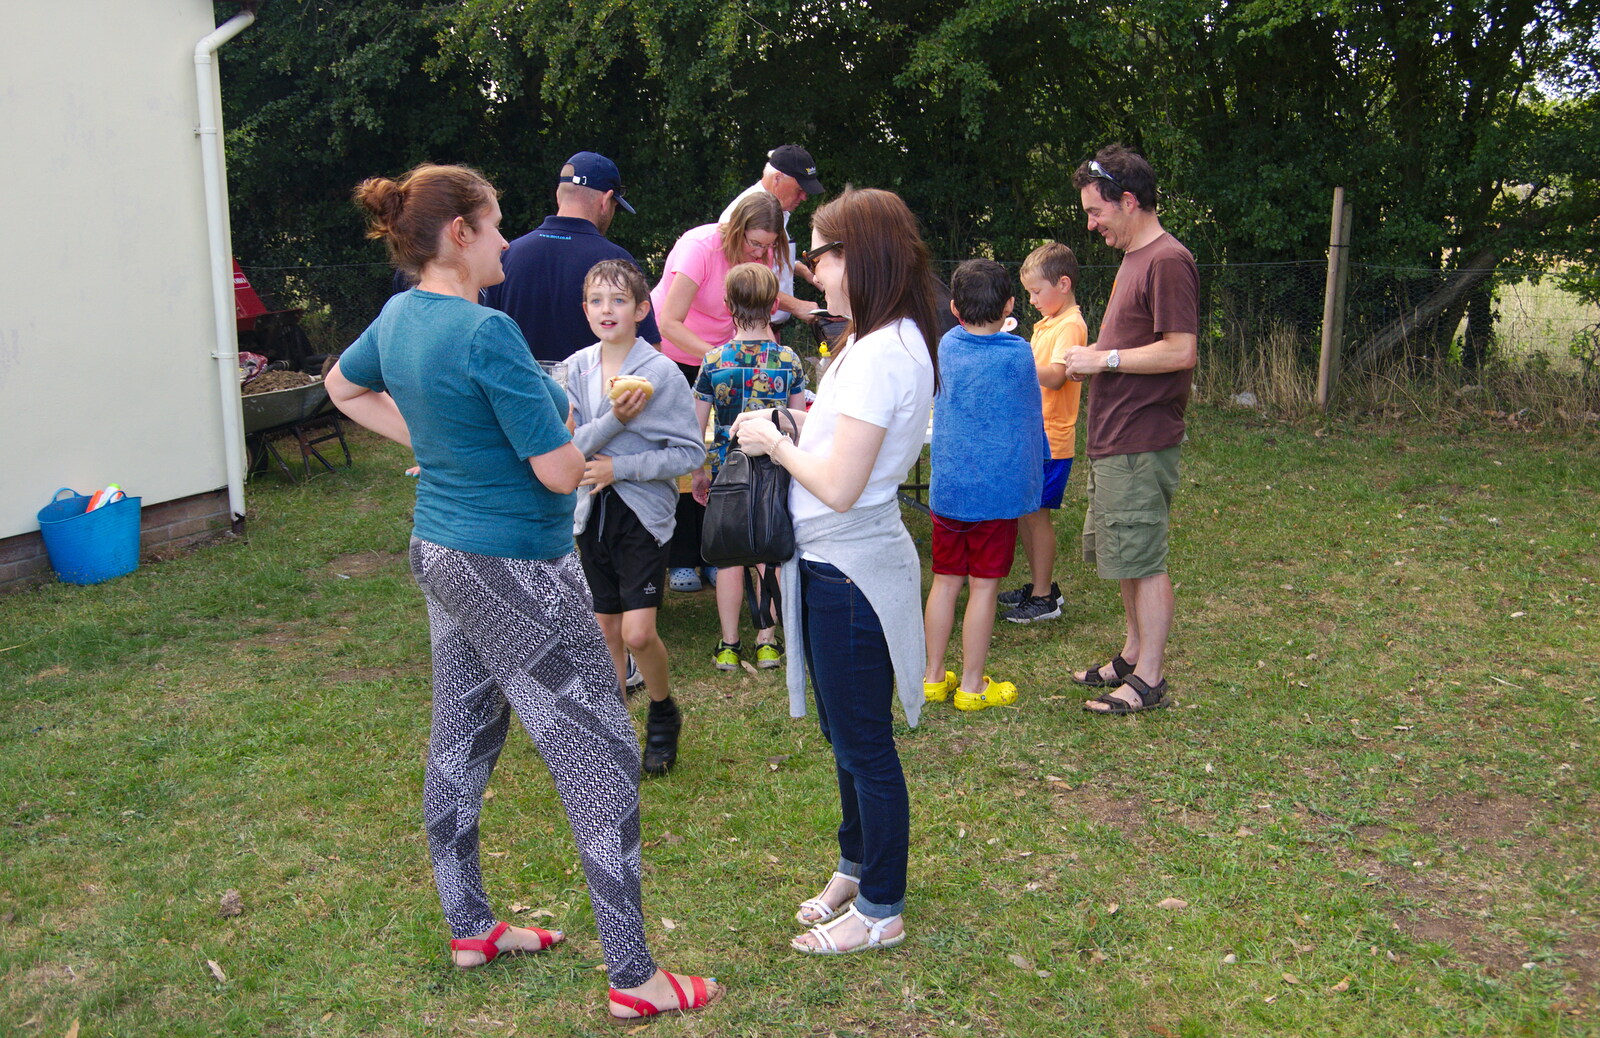 There's a post-water-fight barbeque from A Water Fight with a Fire Engine, Eye Cricket Club, Suffolk - 5th August 2019